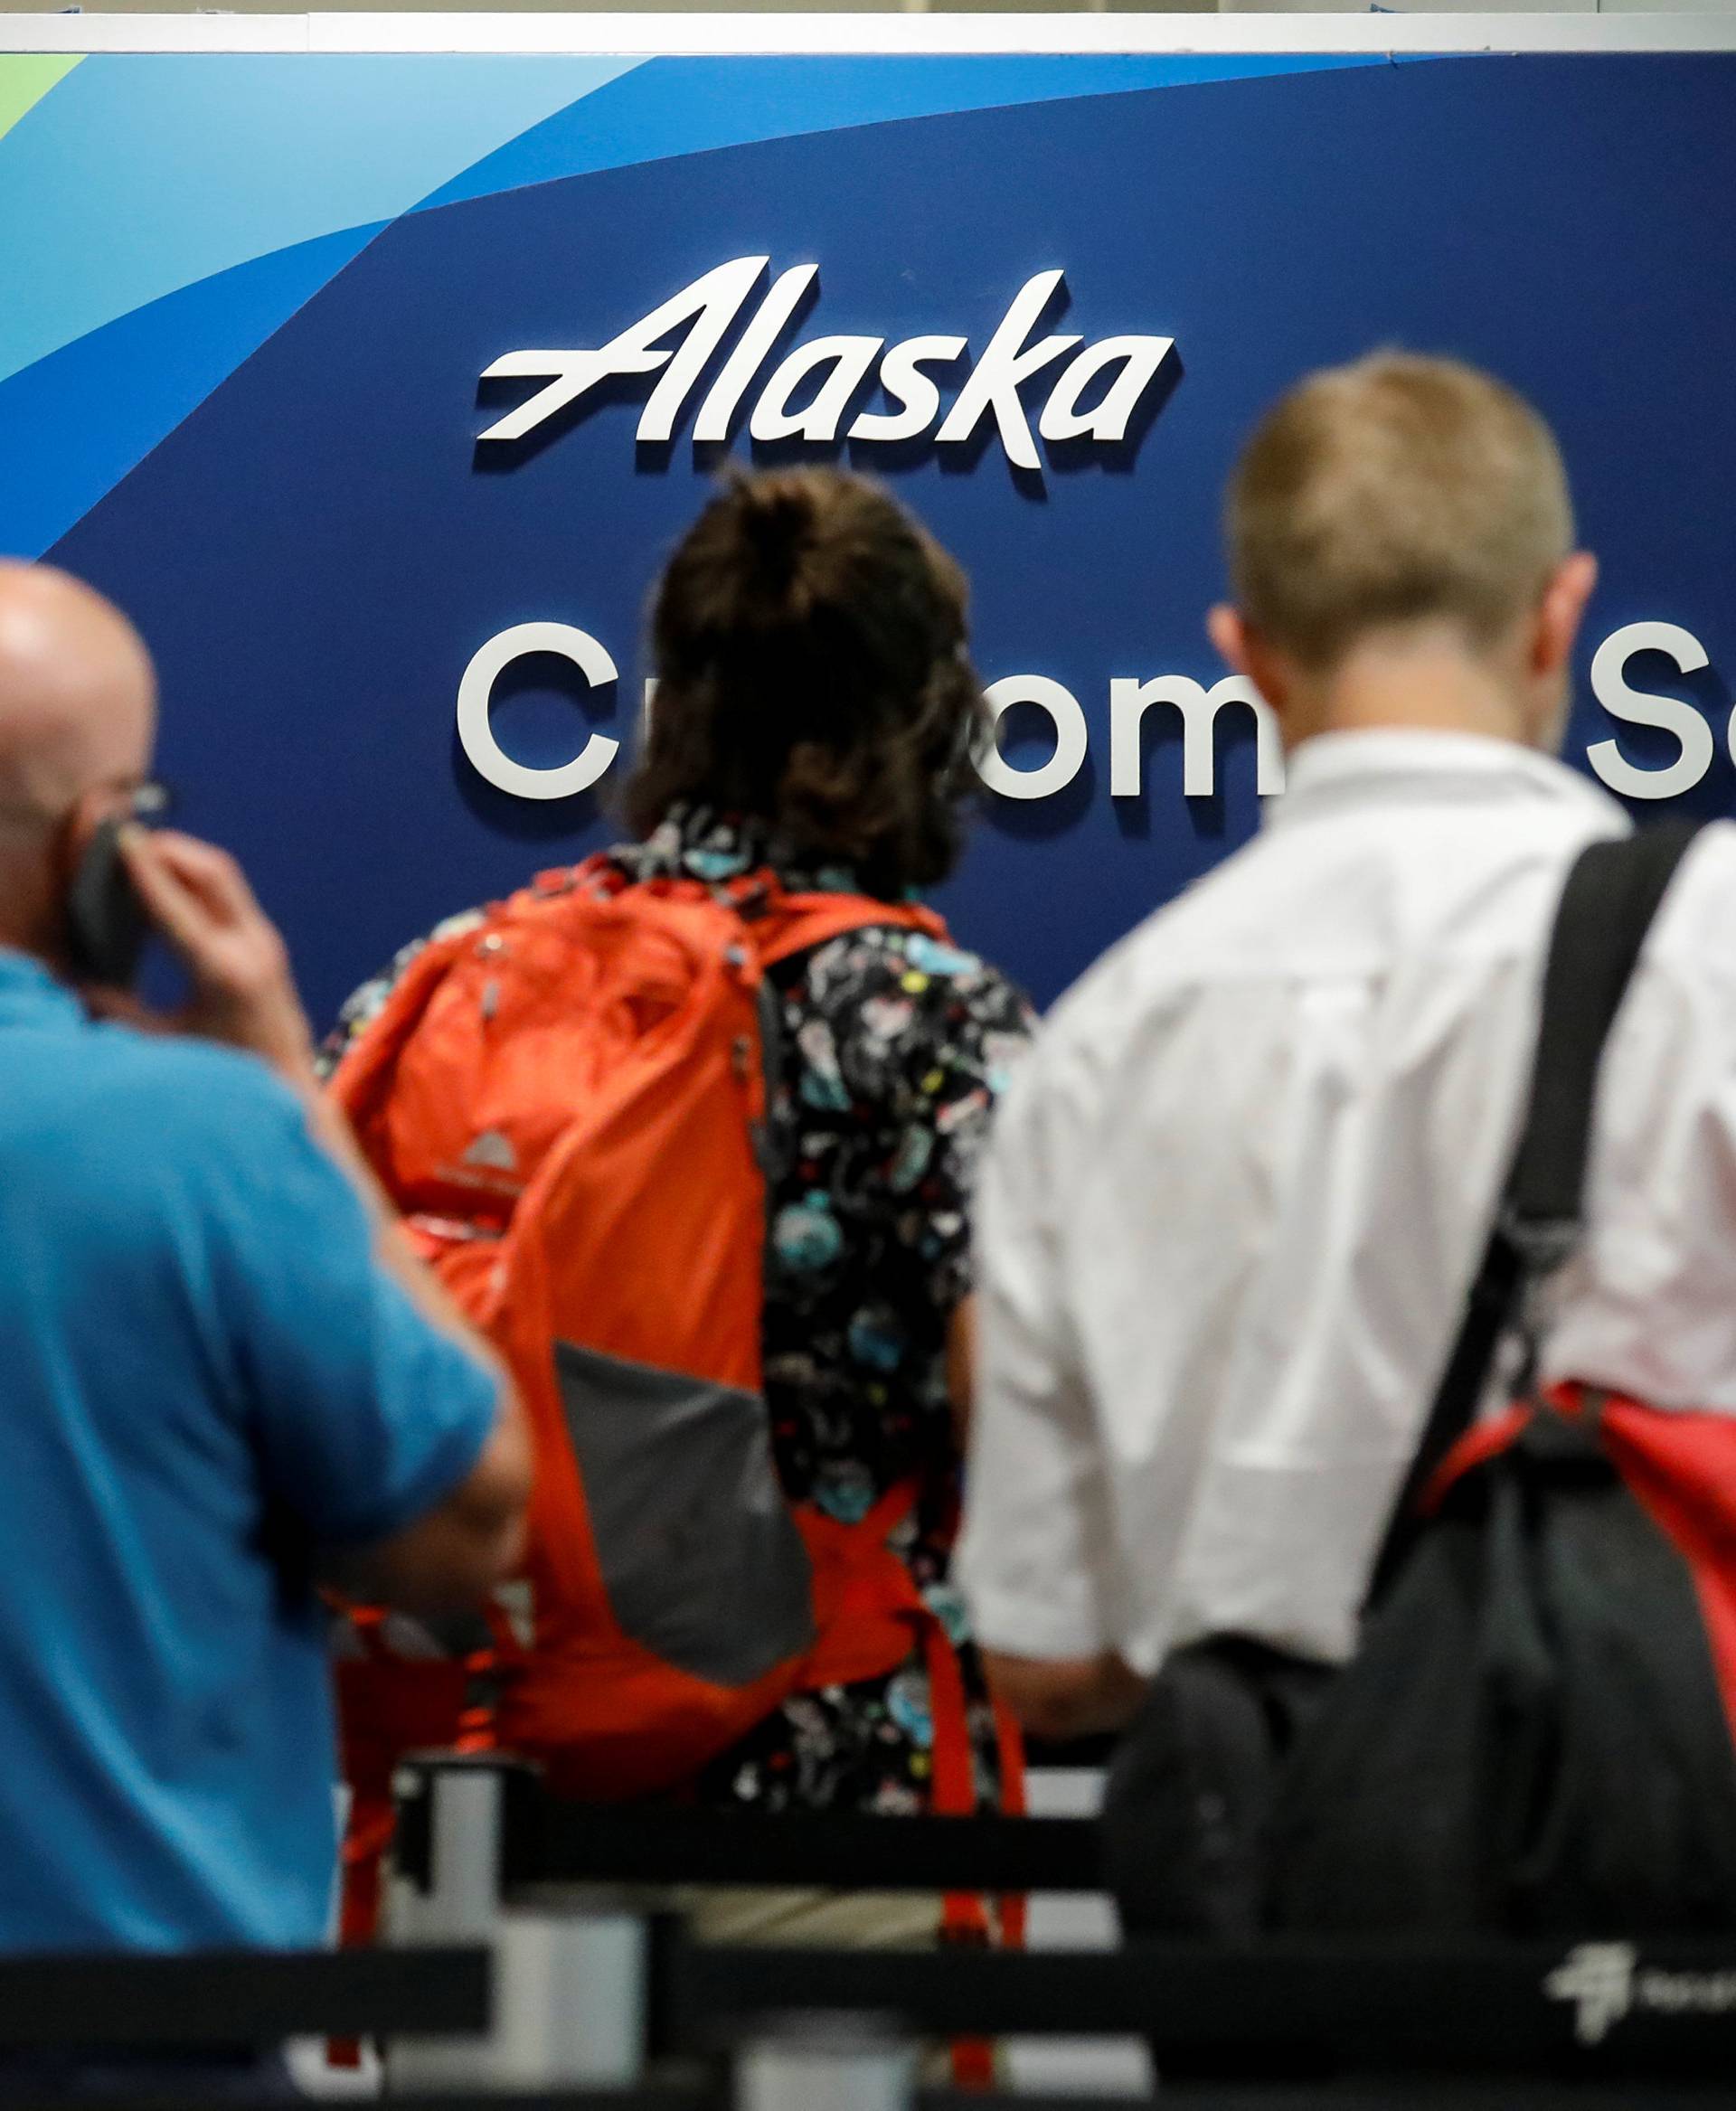 Air Alaska passengers wait at the customer service desk, following an incident where an airline employee took off in an airplane, at Seattle-Tacoma International Airport in Seattle, Washington